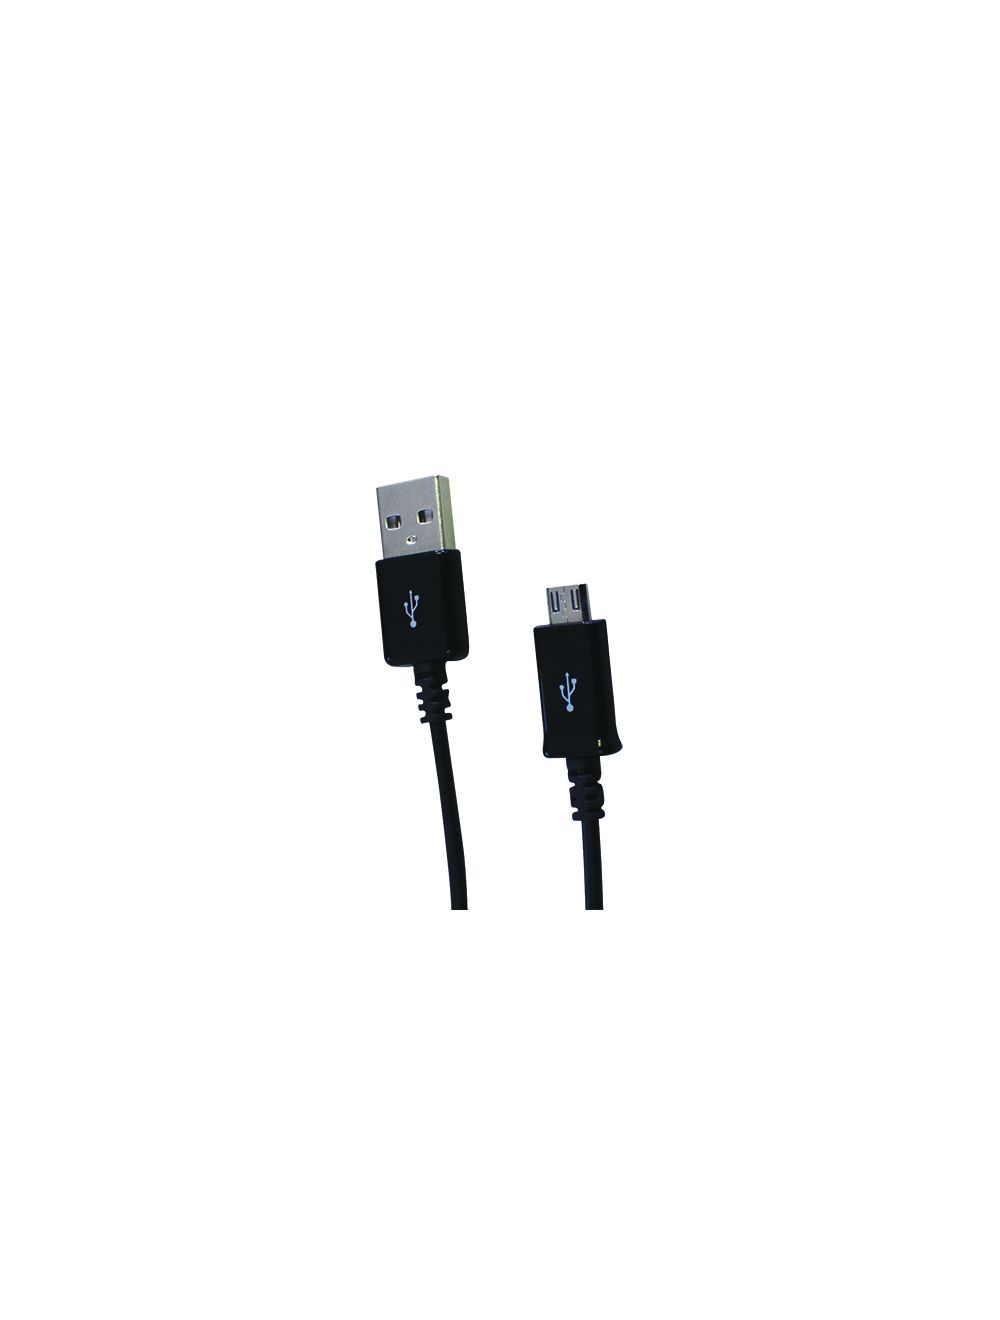 CHARGER AMPLIFY PRO SERIES MICRO USB CABLE